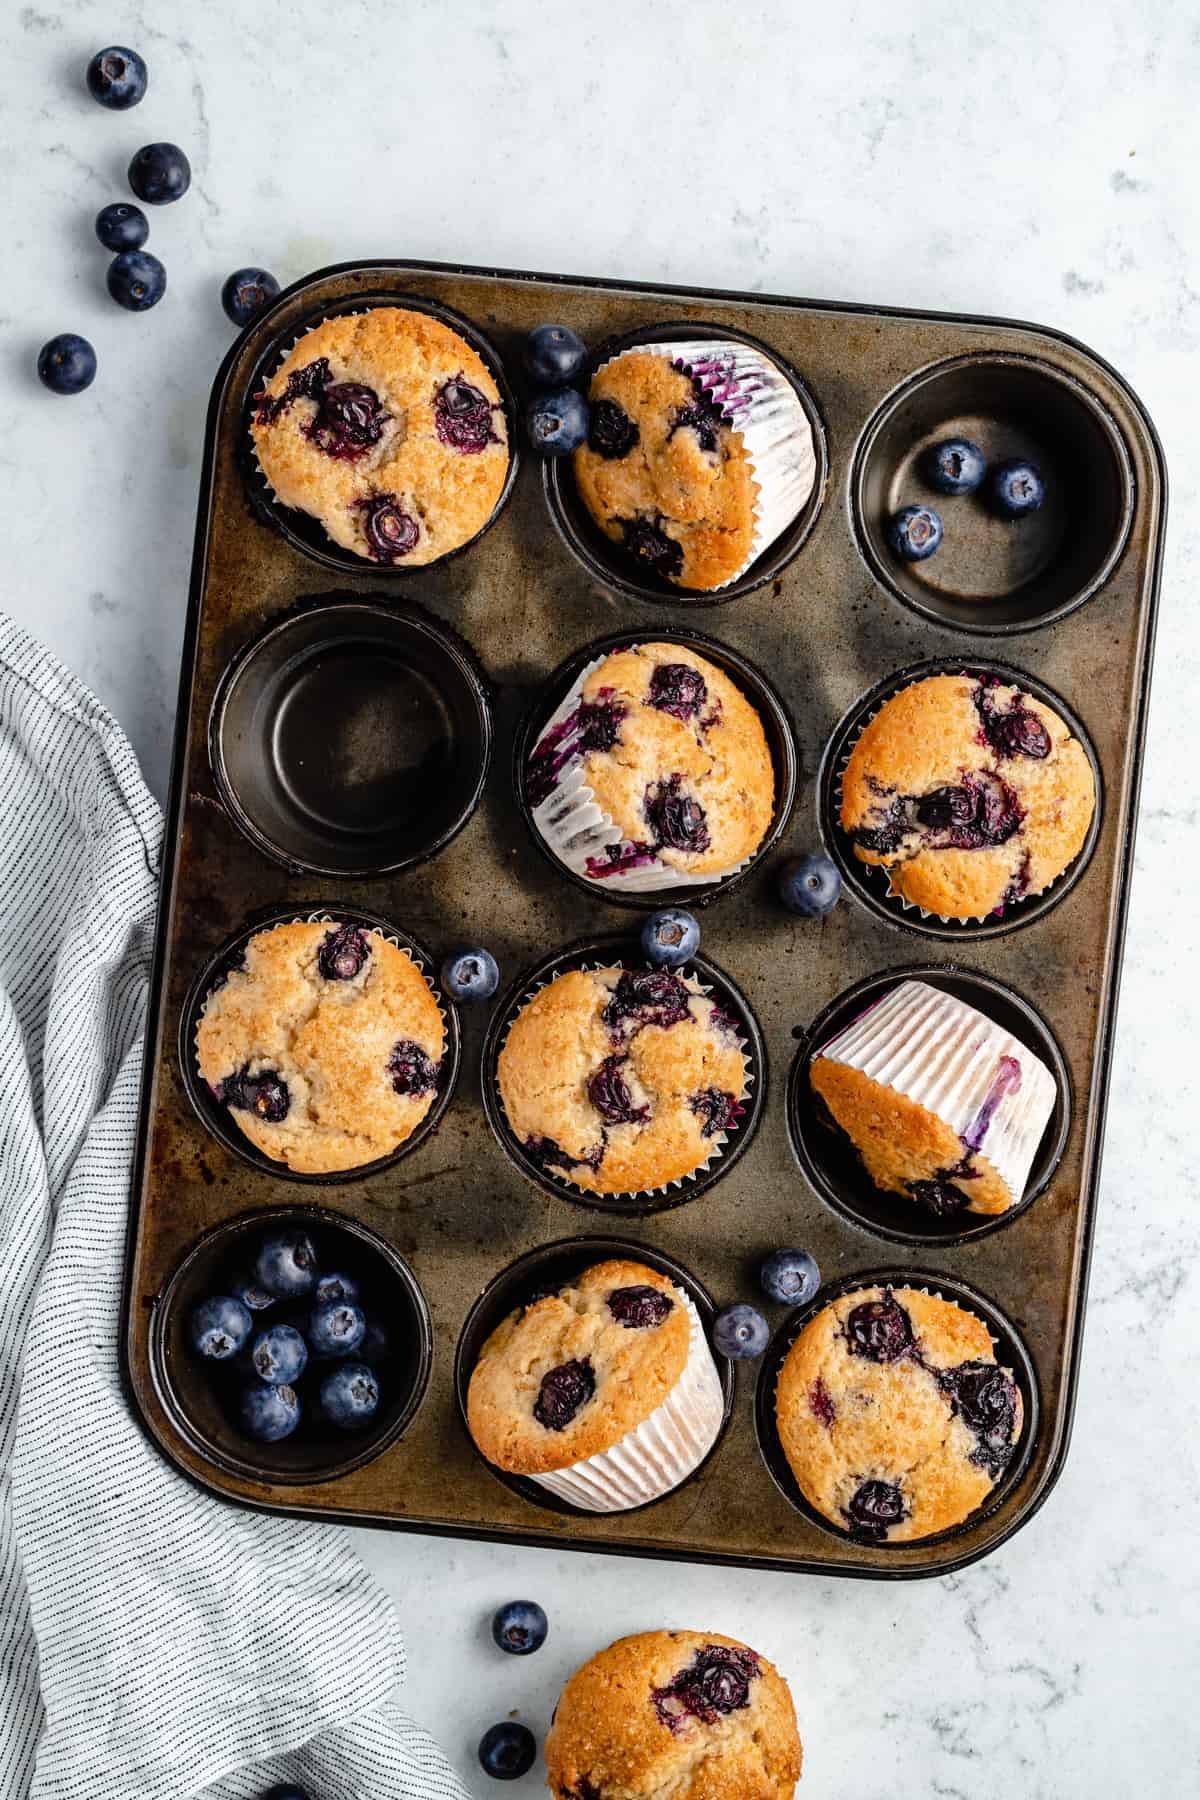 Blueberry muffins and blueberries in a muffin pan.